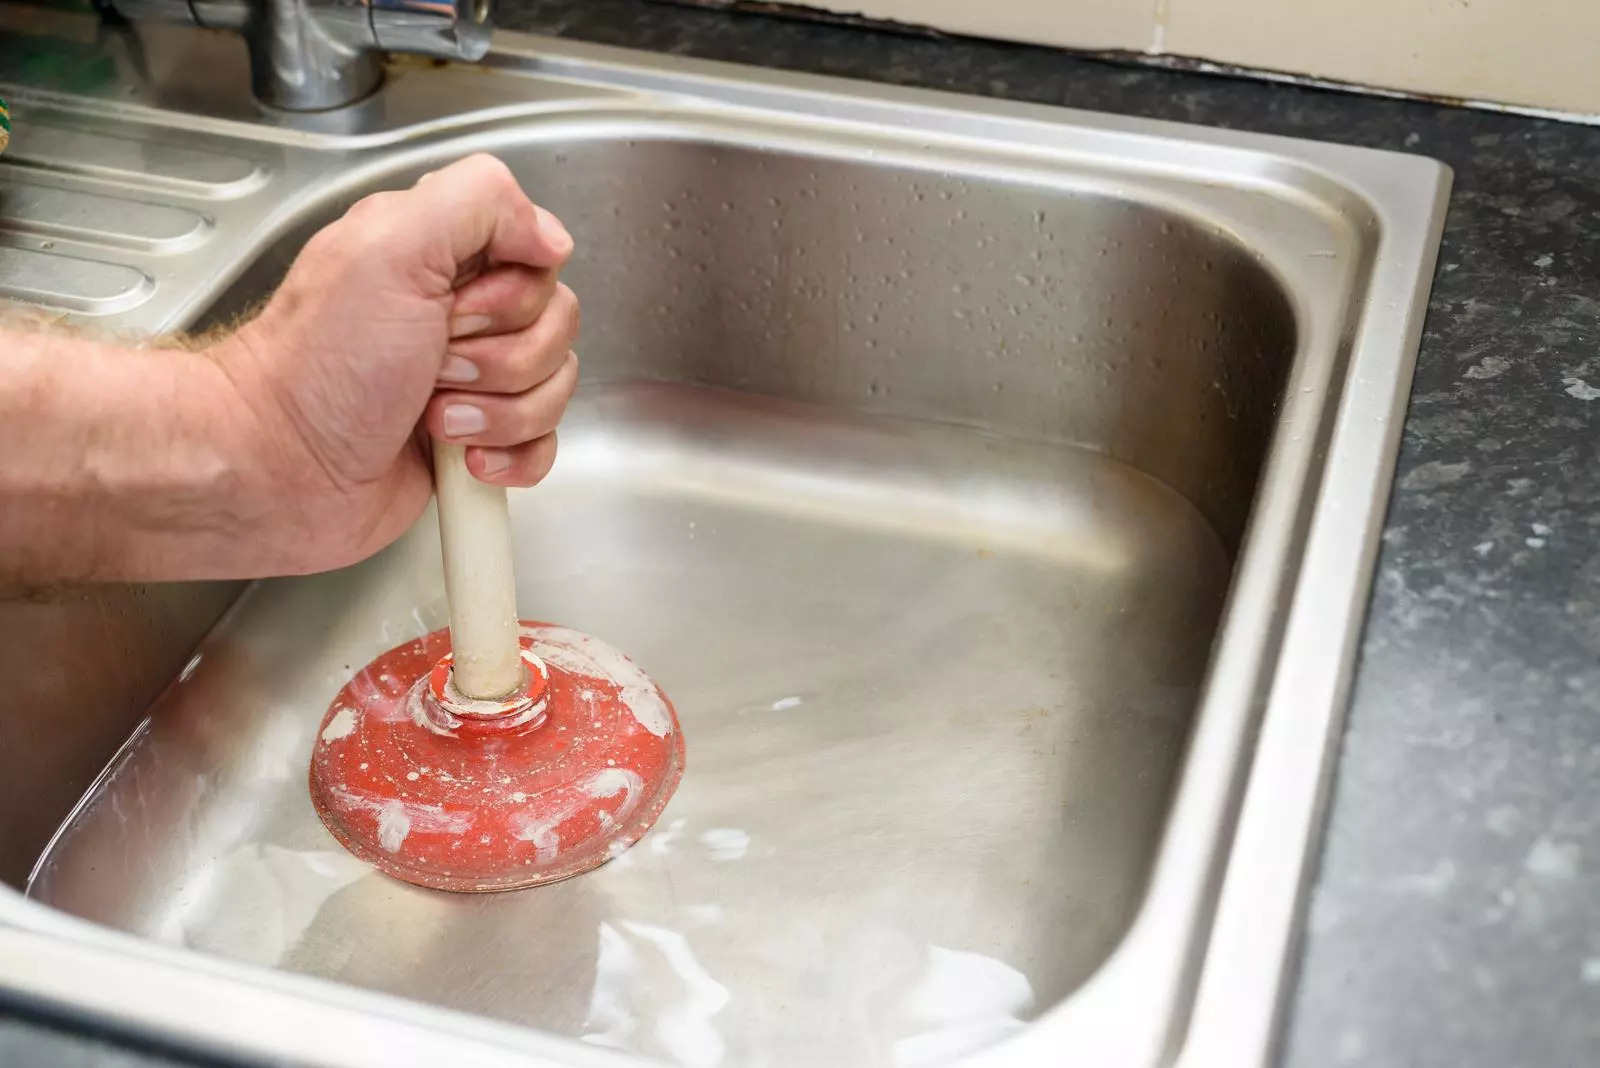 What To Do If The Sink Is Clogged